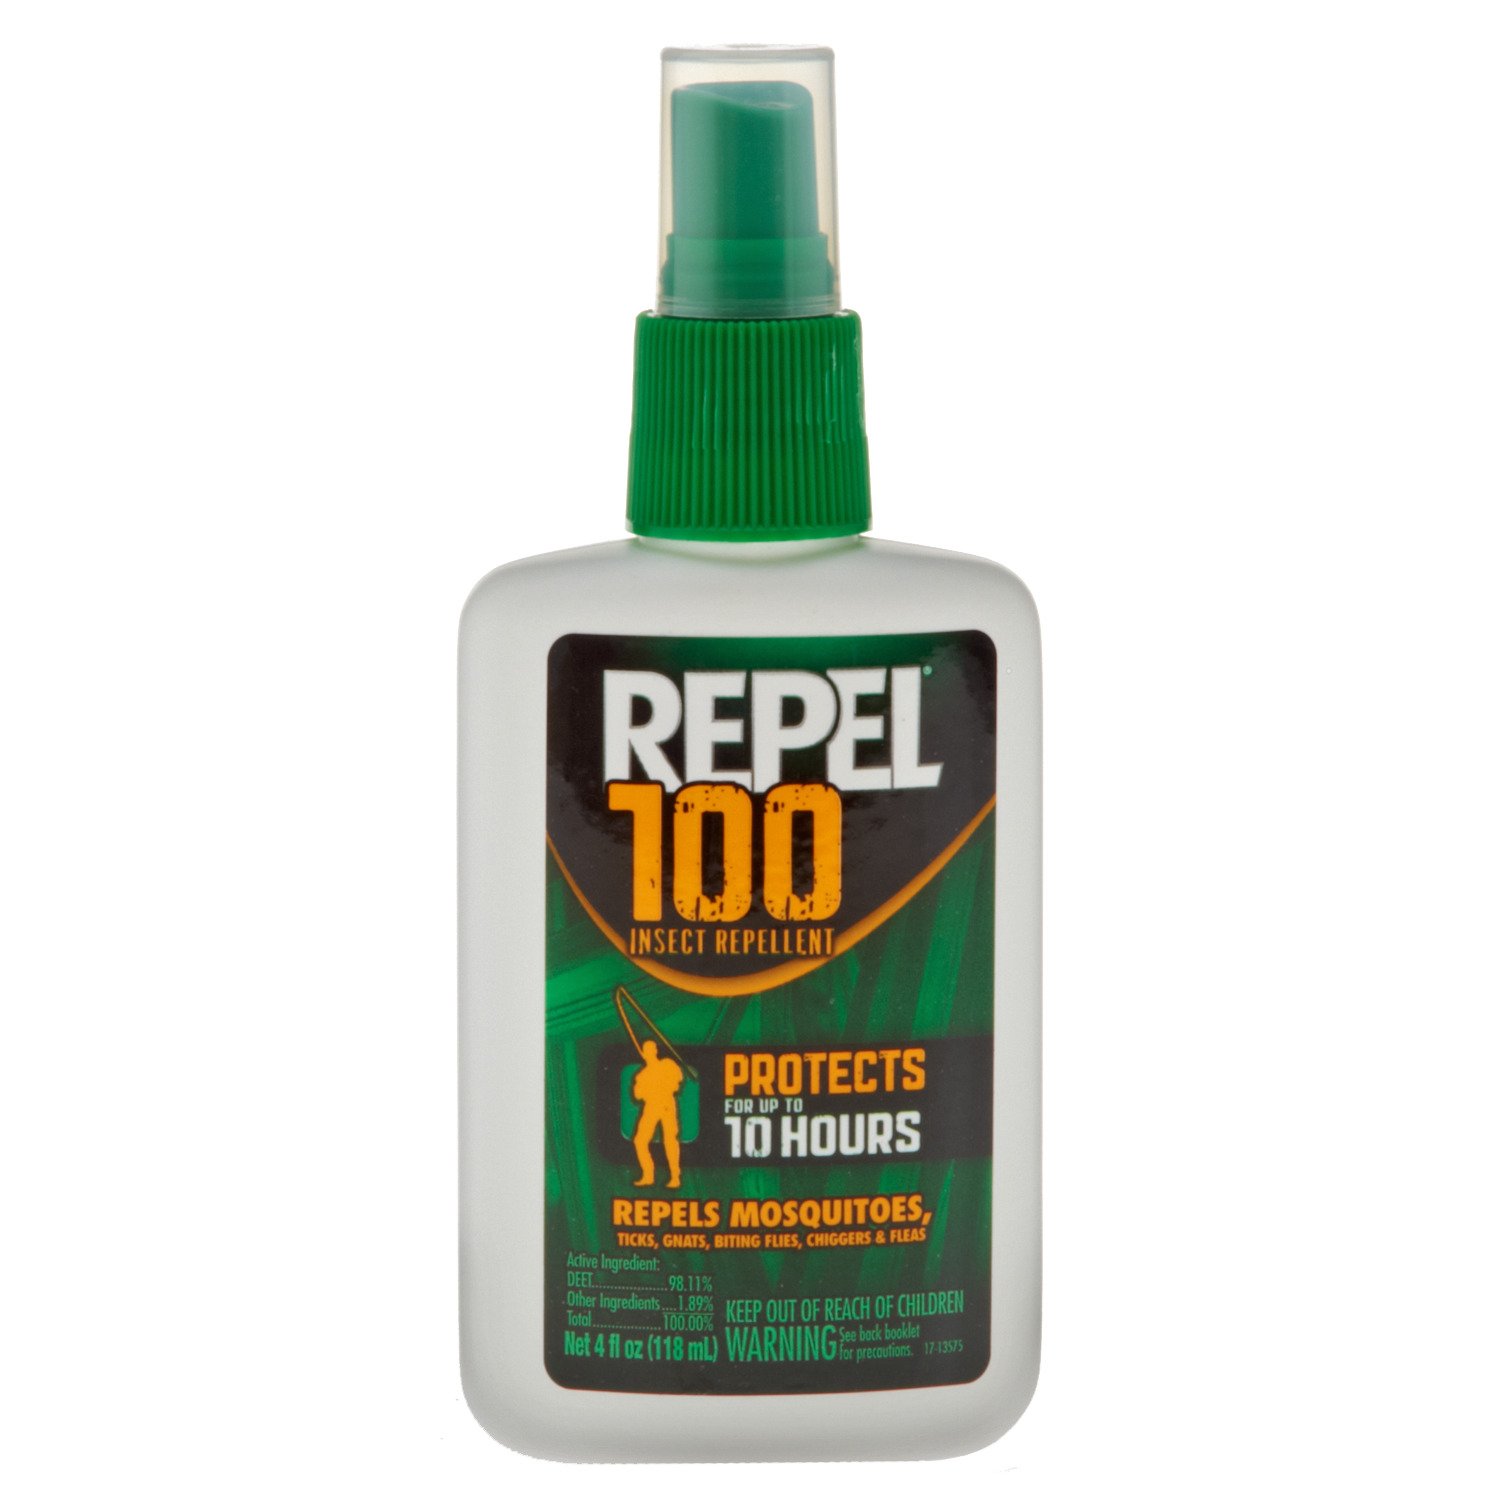 Repel 100 4 fl. oz. Insect Repellent                                                                                             - view number 1 selected